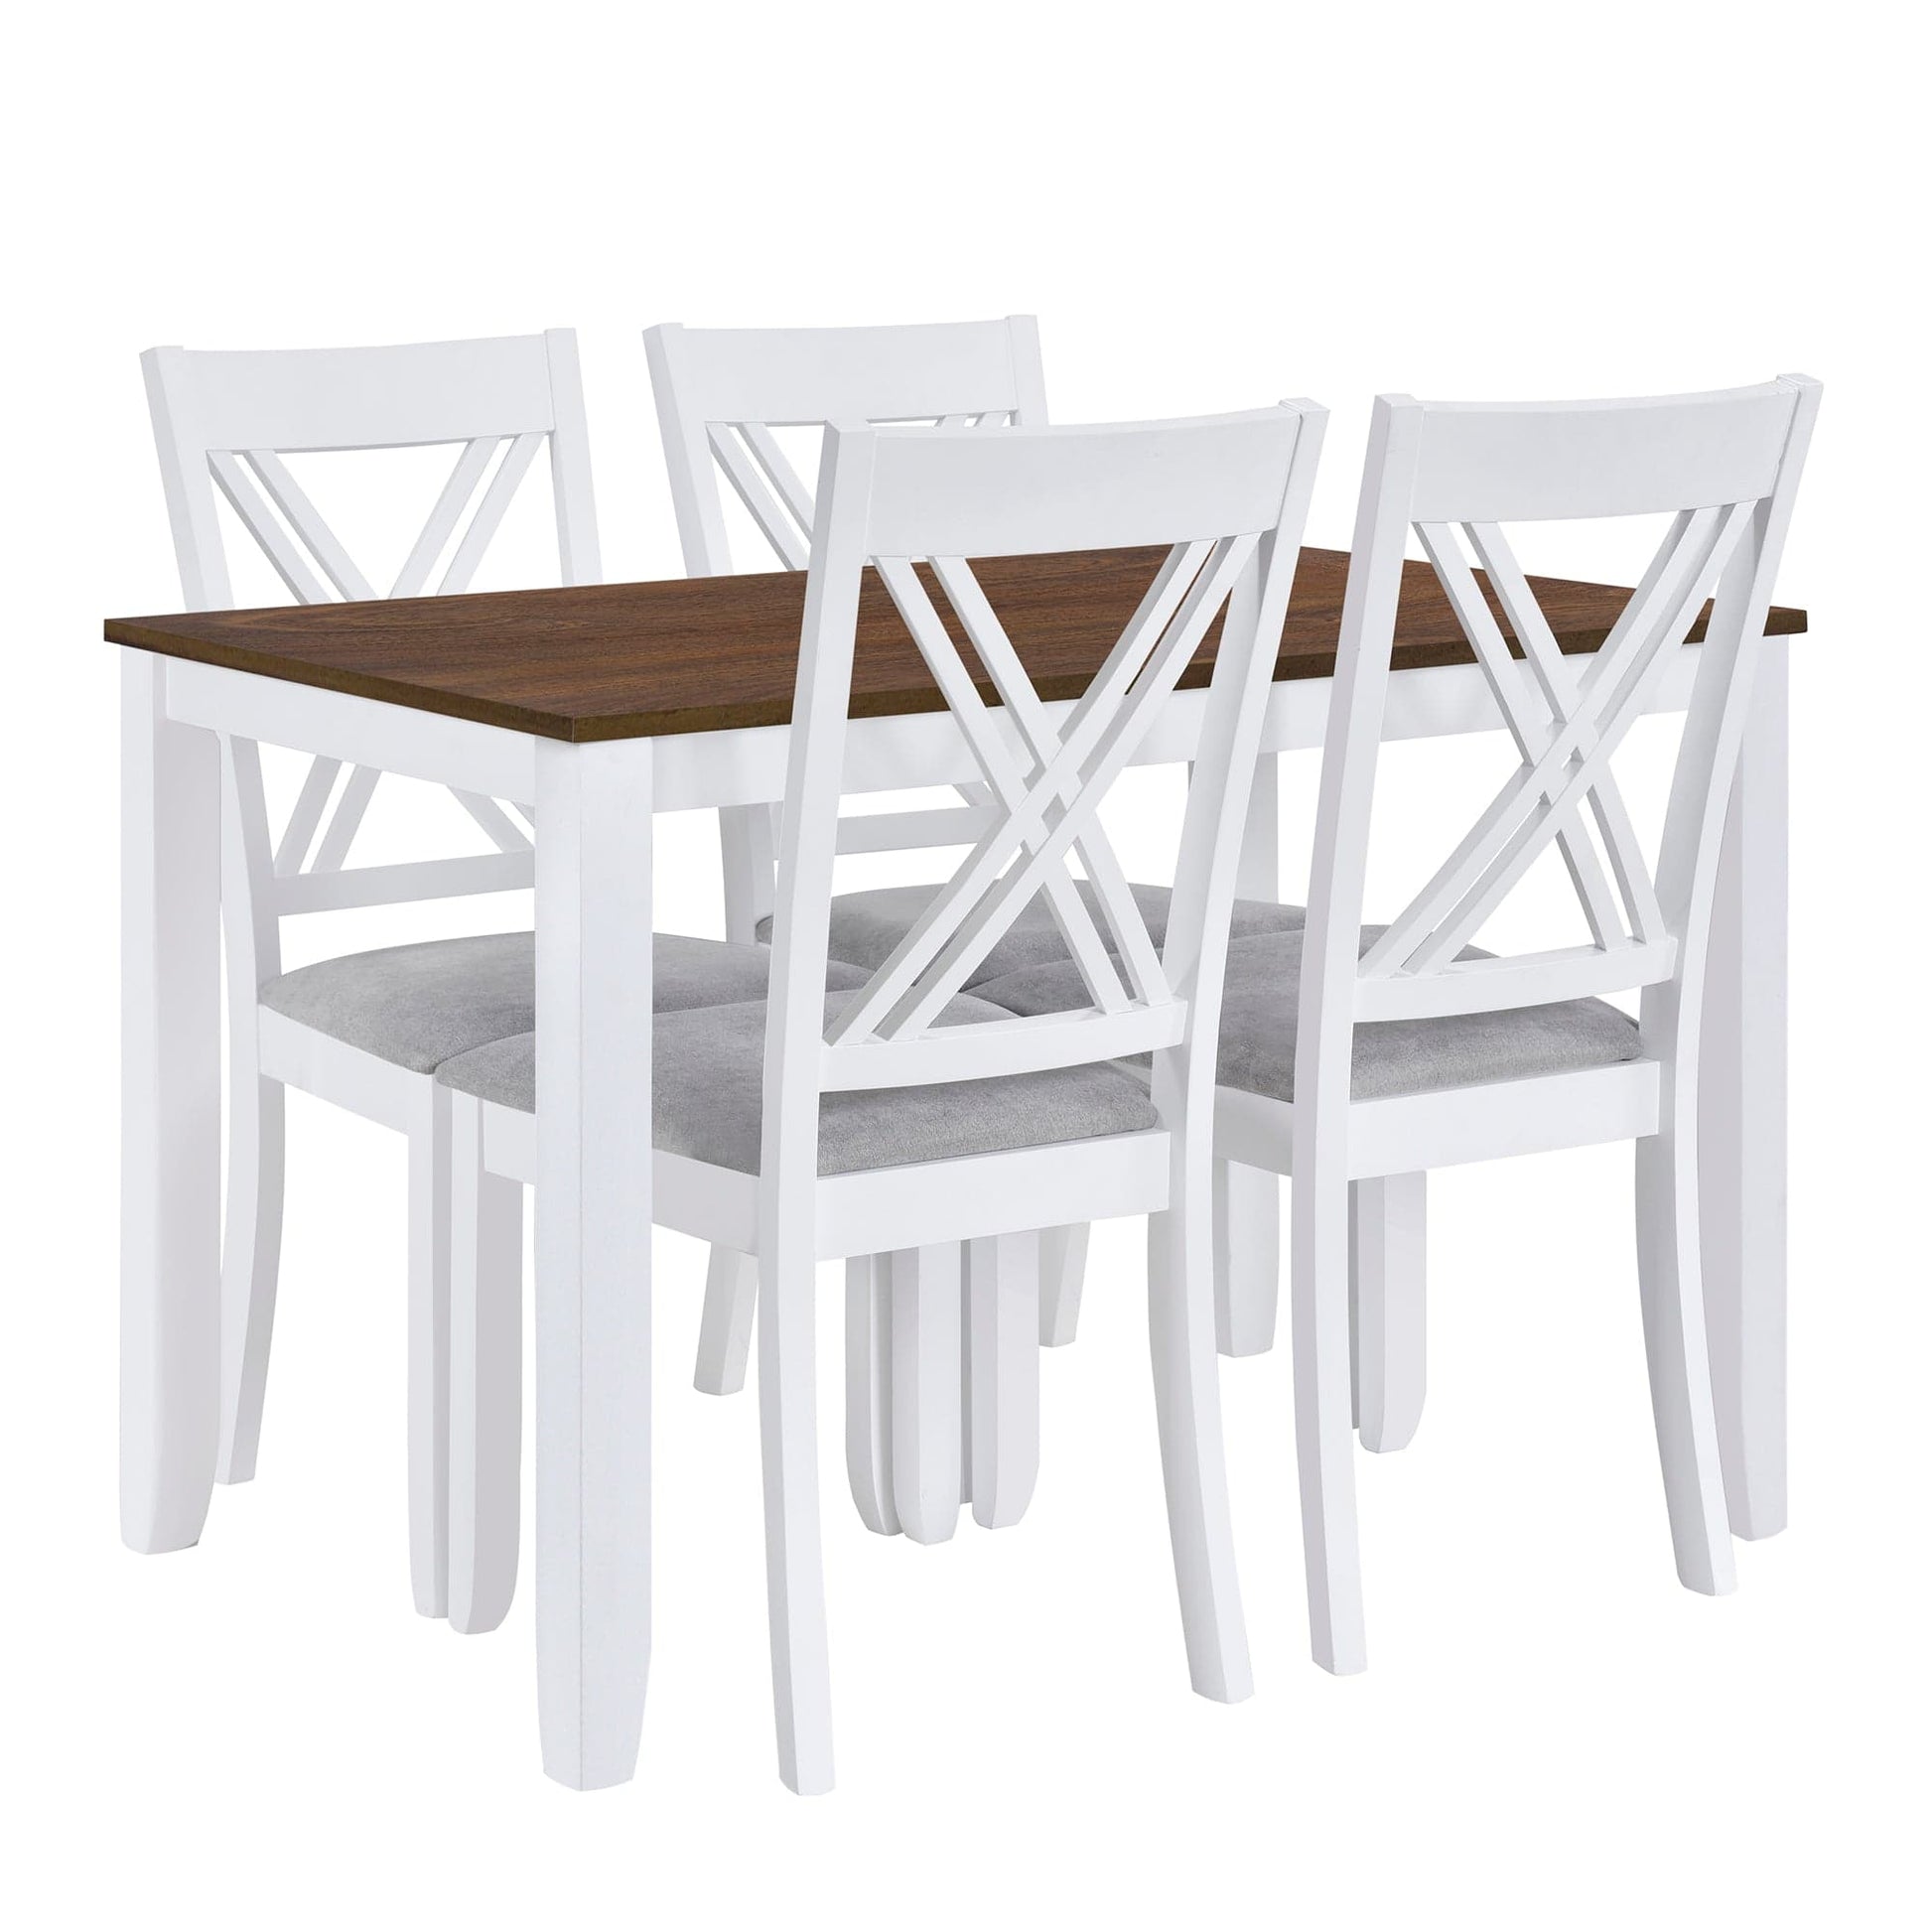 1st Choice Furniture Direct Dining Set 1st Choice 5 Piece Rustic White Wood Dining Set with X-Back Chairs